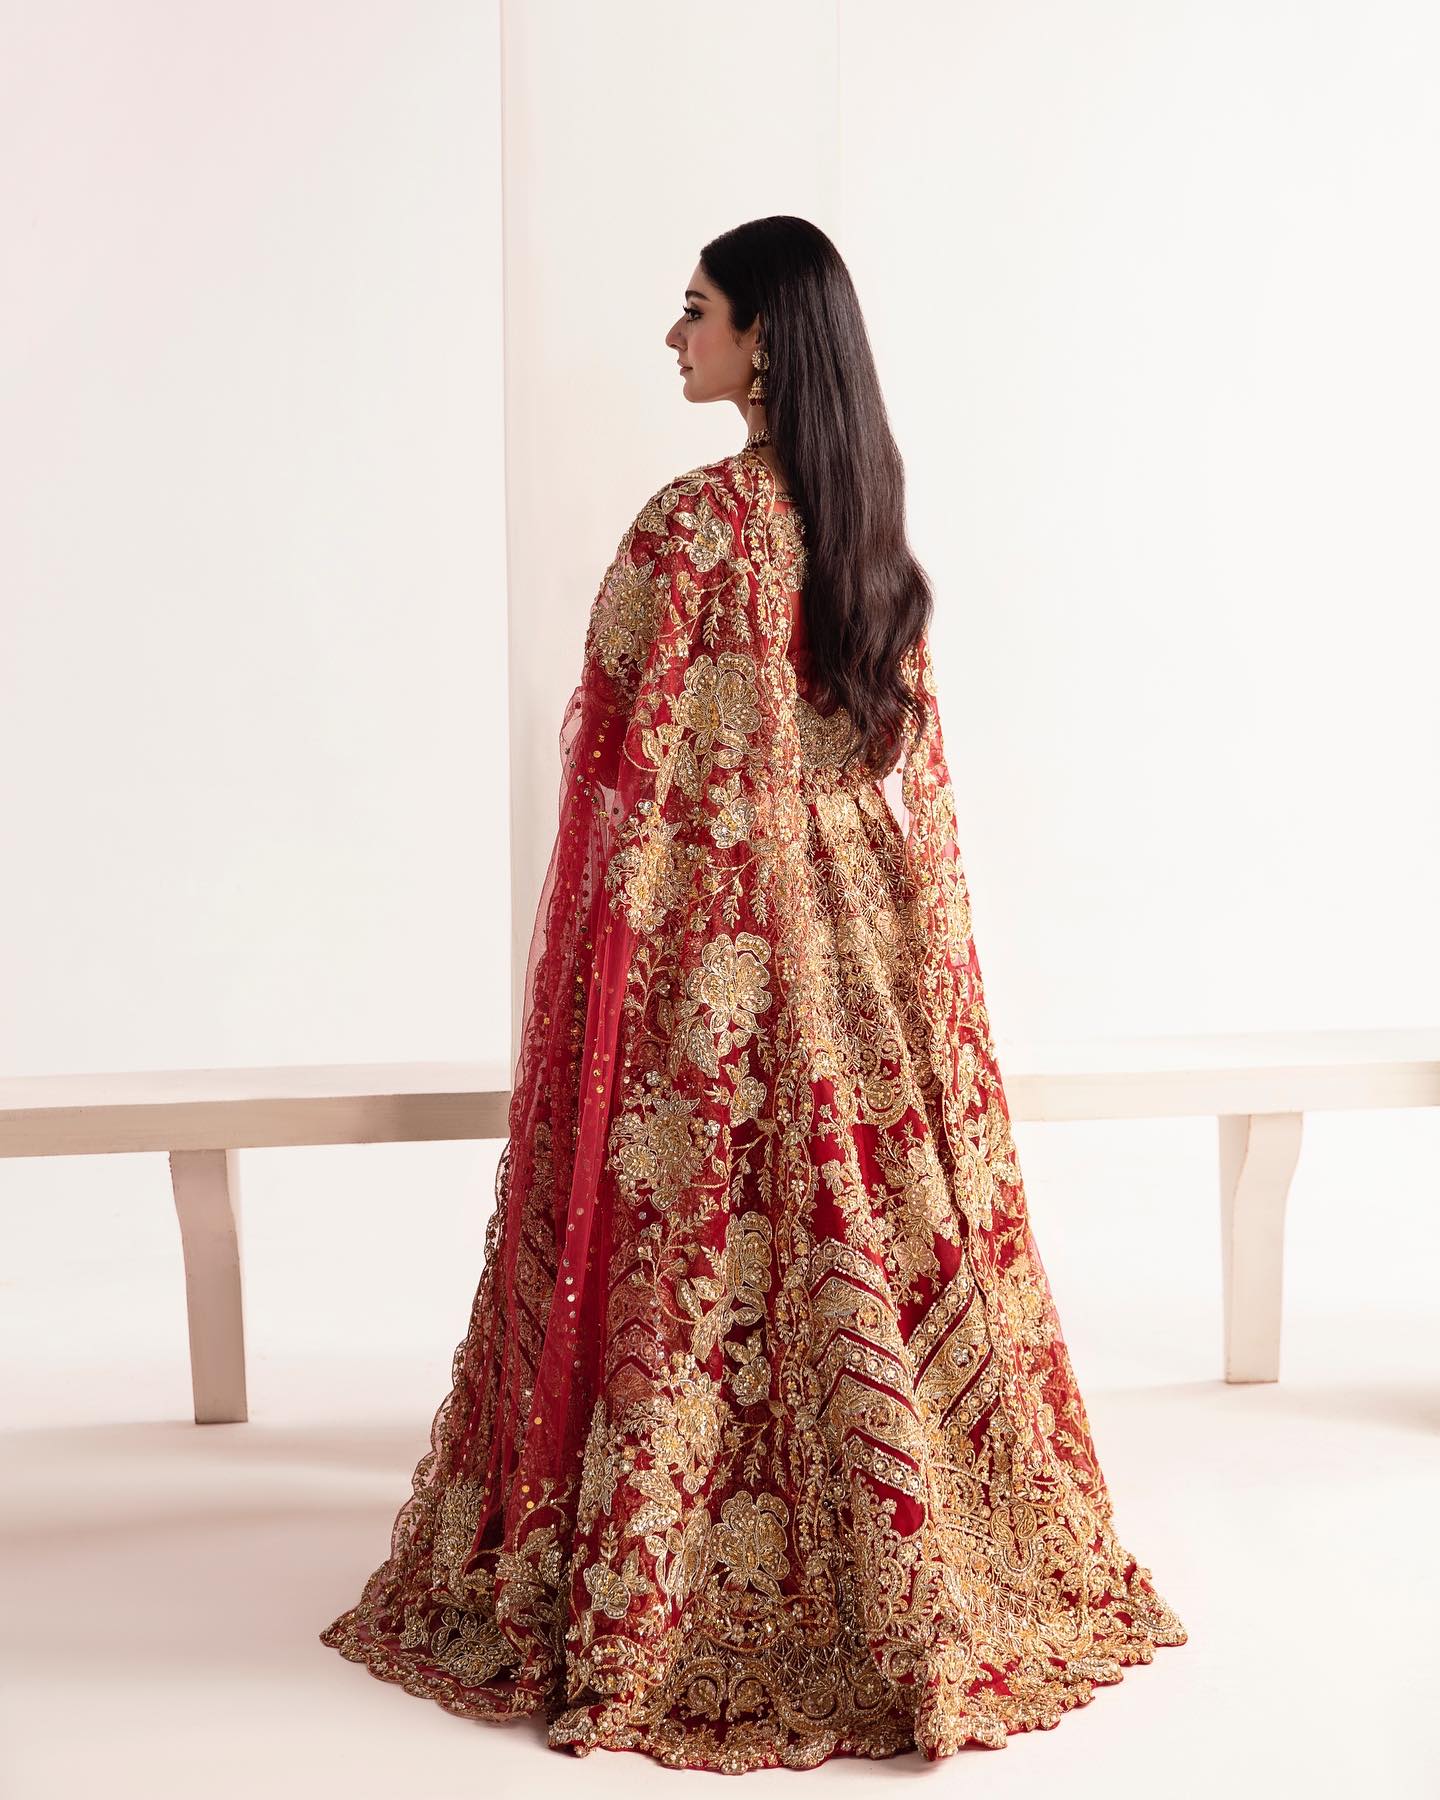 Red and gold bridal dress